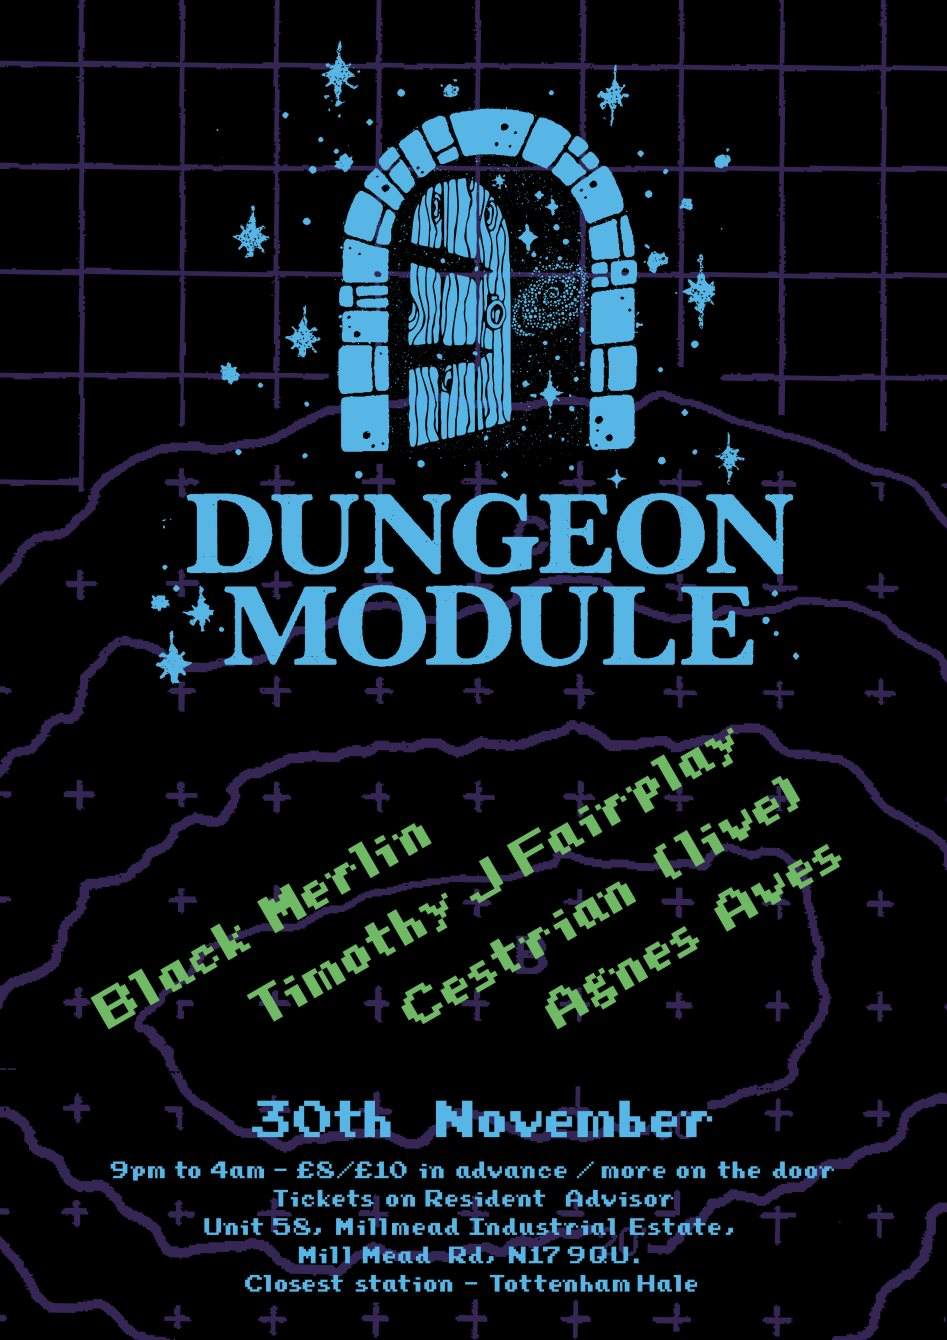 Dungeon Module with Black Merlin, Timothy J. Fairplay and More - フライヤー表